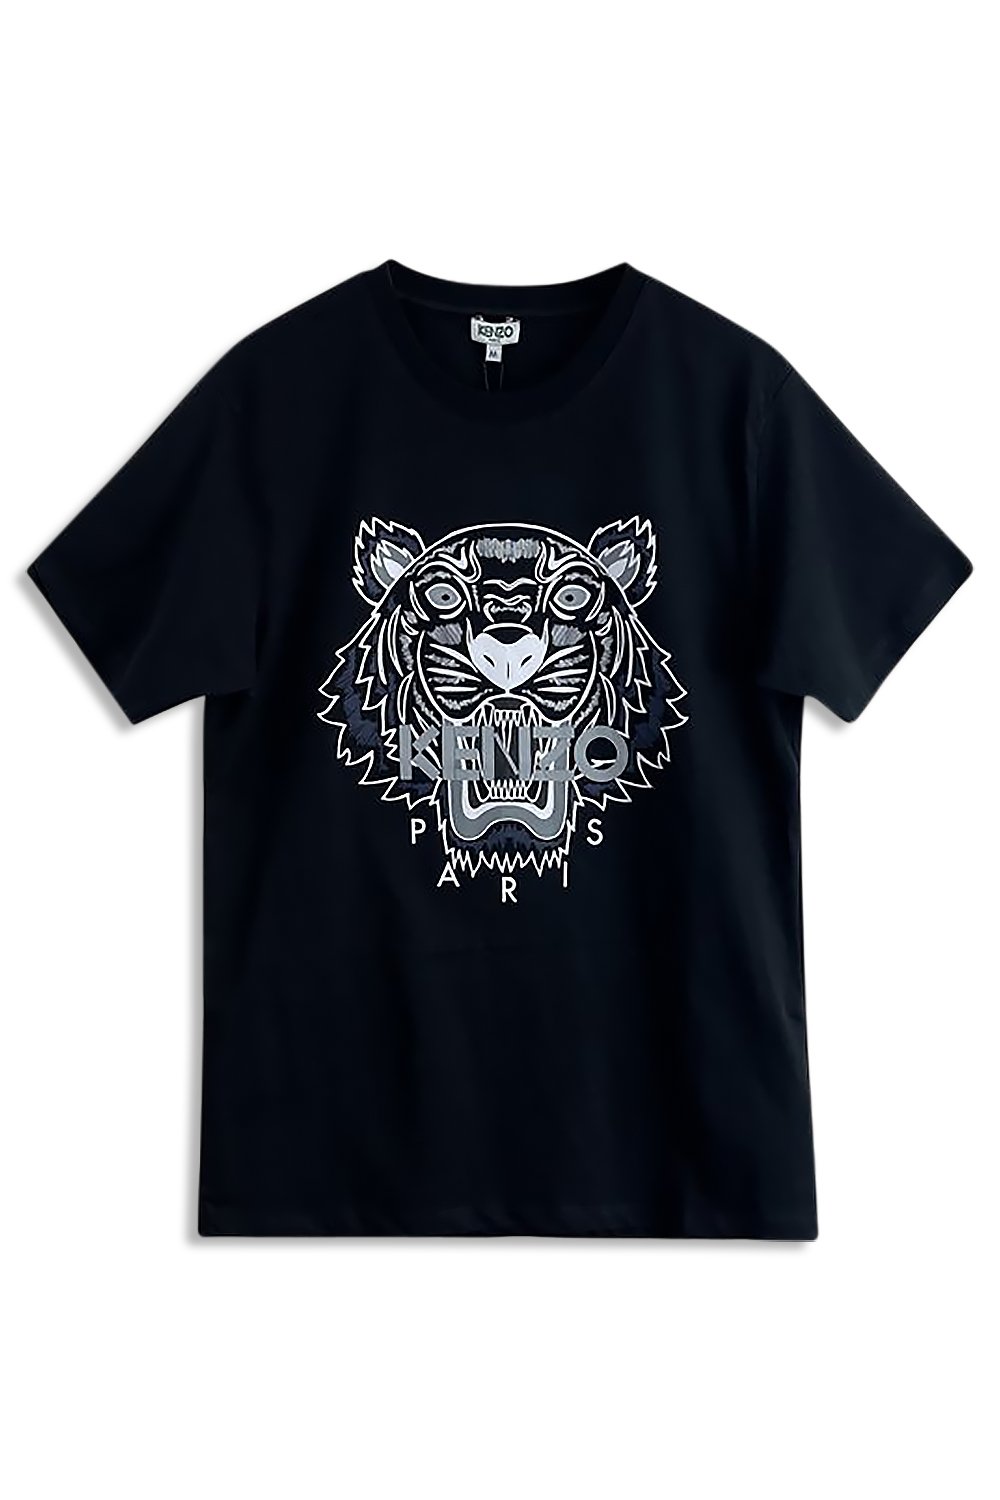 Shop the Men's Black Kenzo Classic Grey and White Tiger T-Shirt